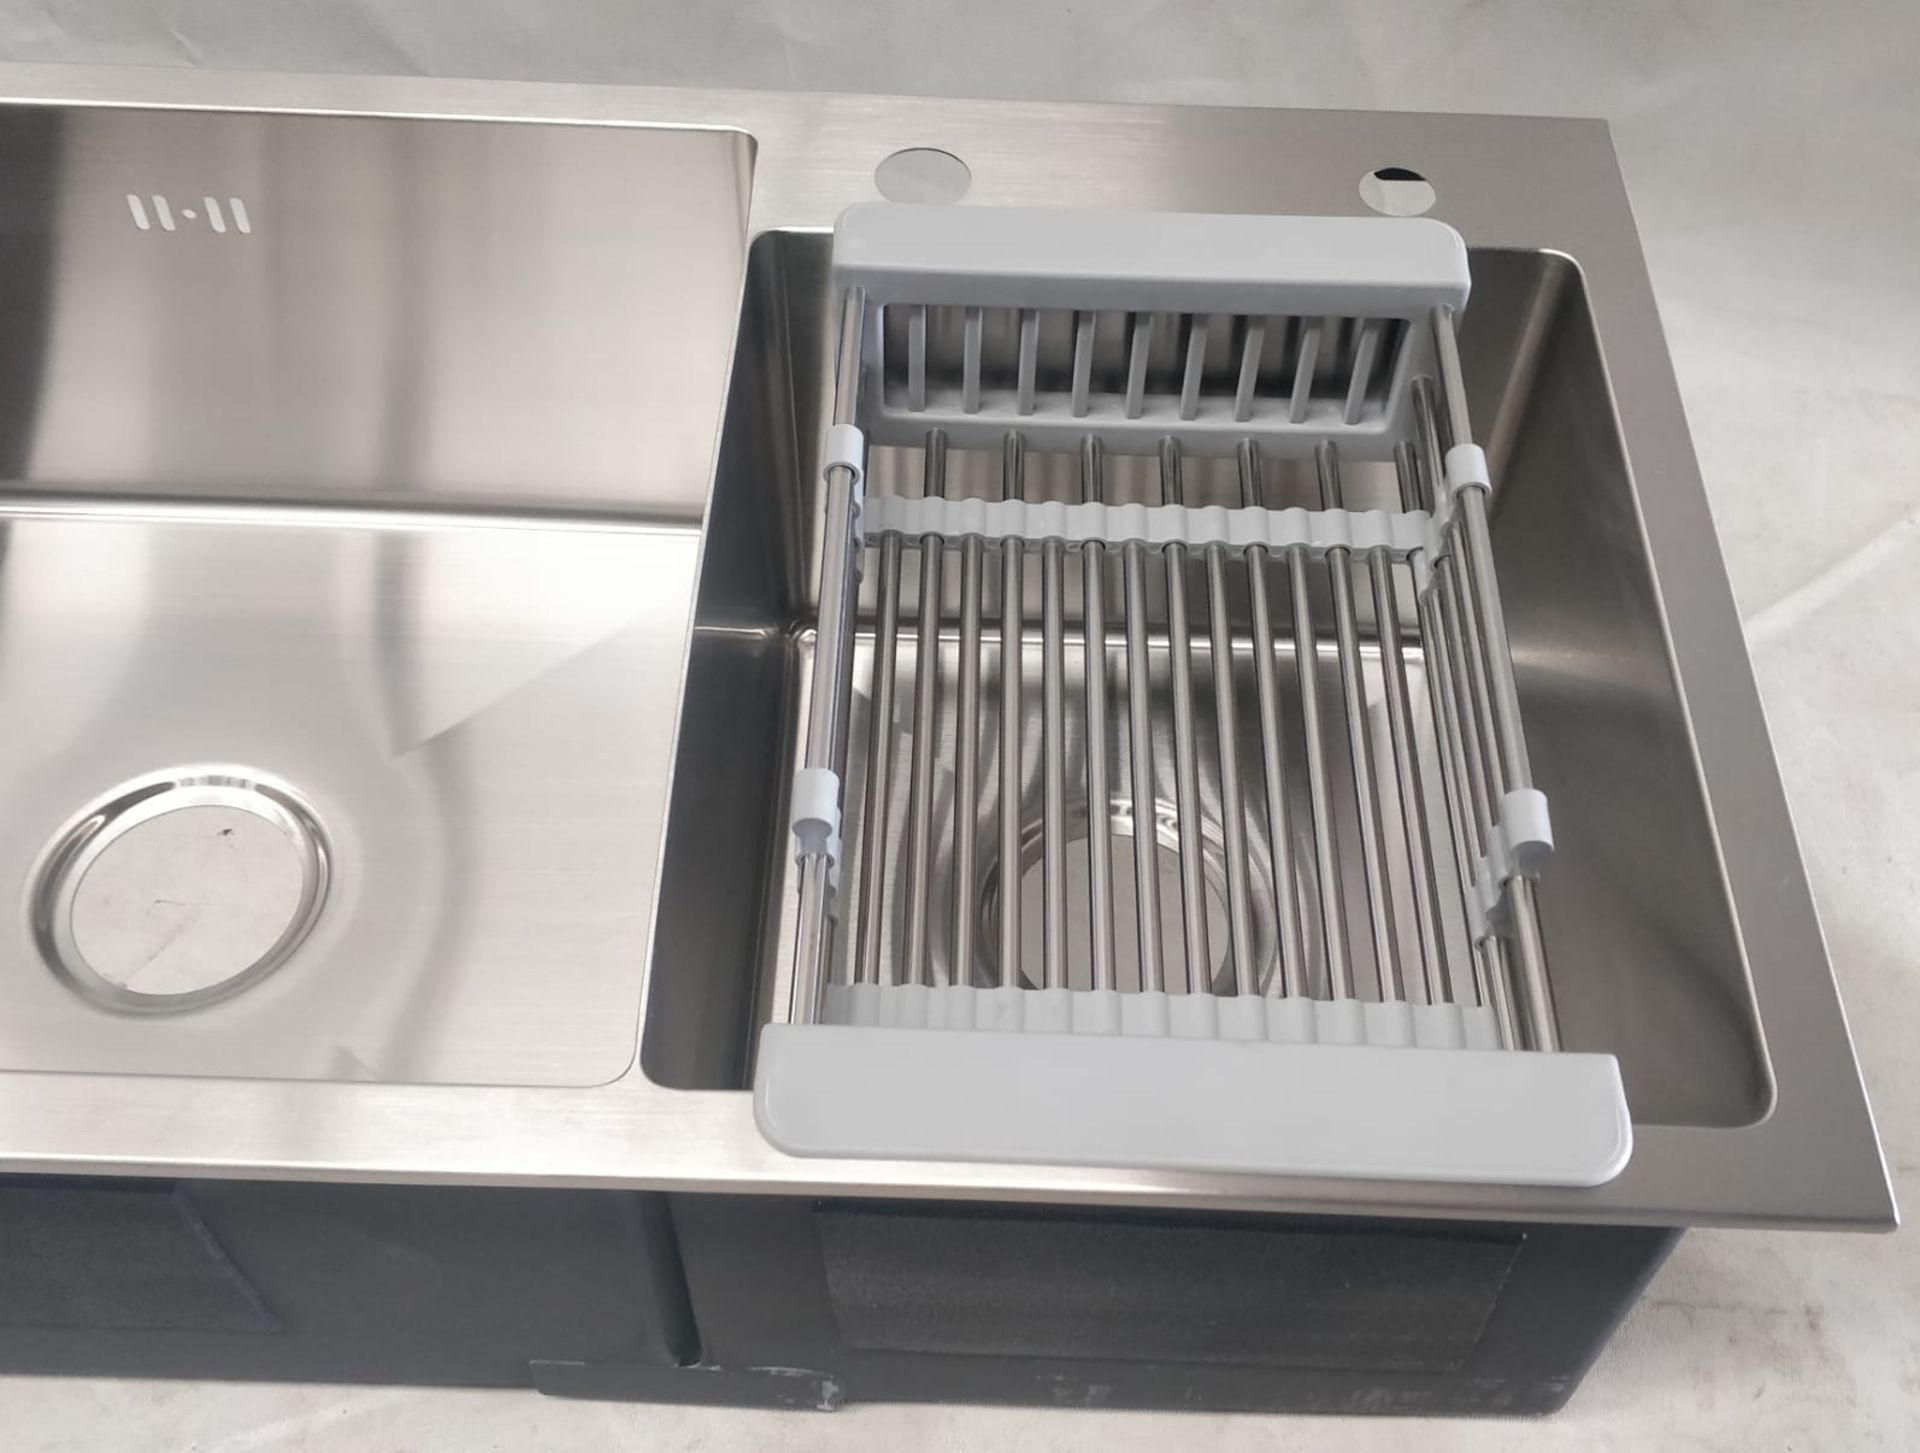 1 x Twin Bowl Contemporary Kitchen Sink Basin - Stainless Steel Finish - Model KS0059 - Includes - Image 10 of 16